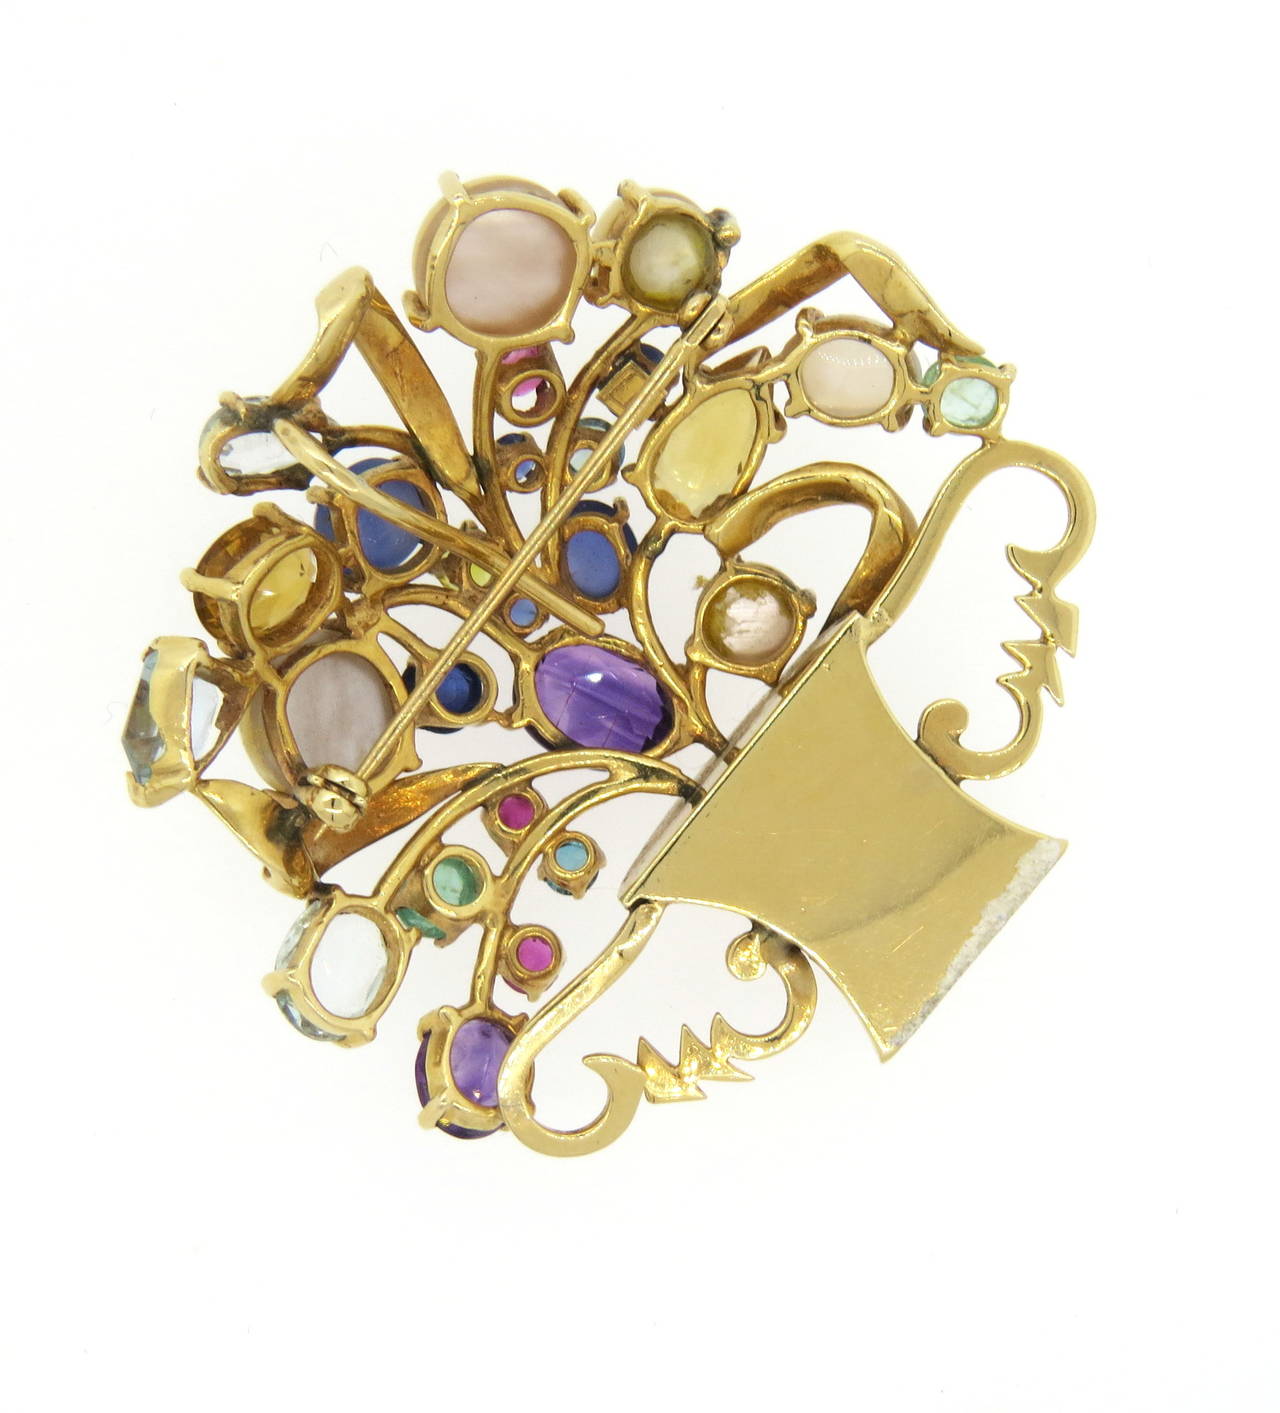 Beautiful and colorful Retro brooch, set in 14k gold. Brooch can be also worn as a pendant, set with pearls and multicolor gemstones. Piece measures 54mm x 55mm and weights 32 grams